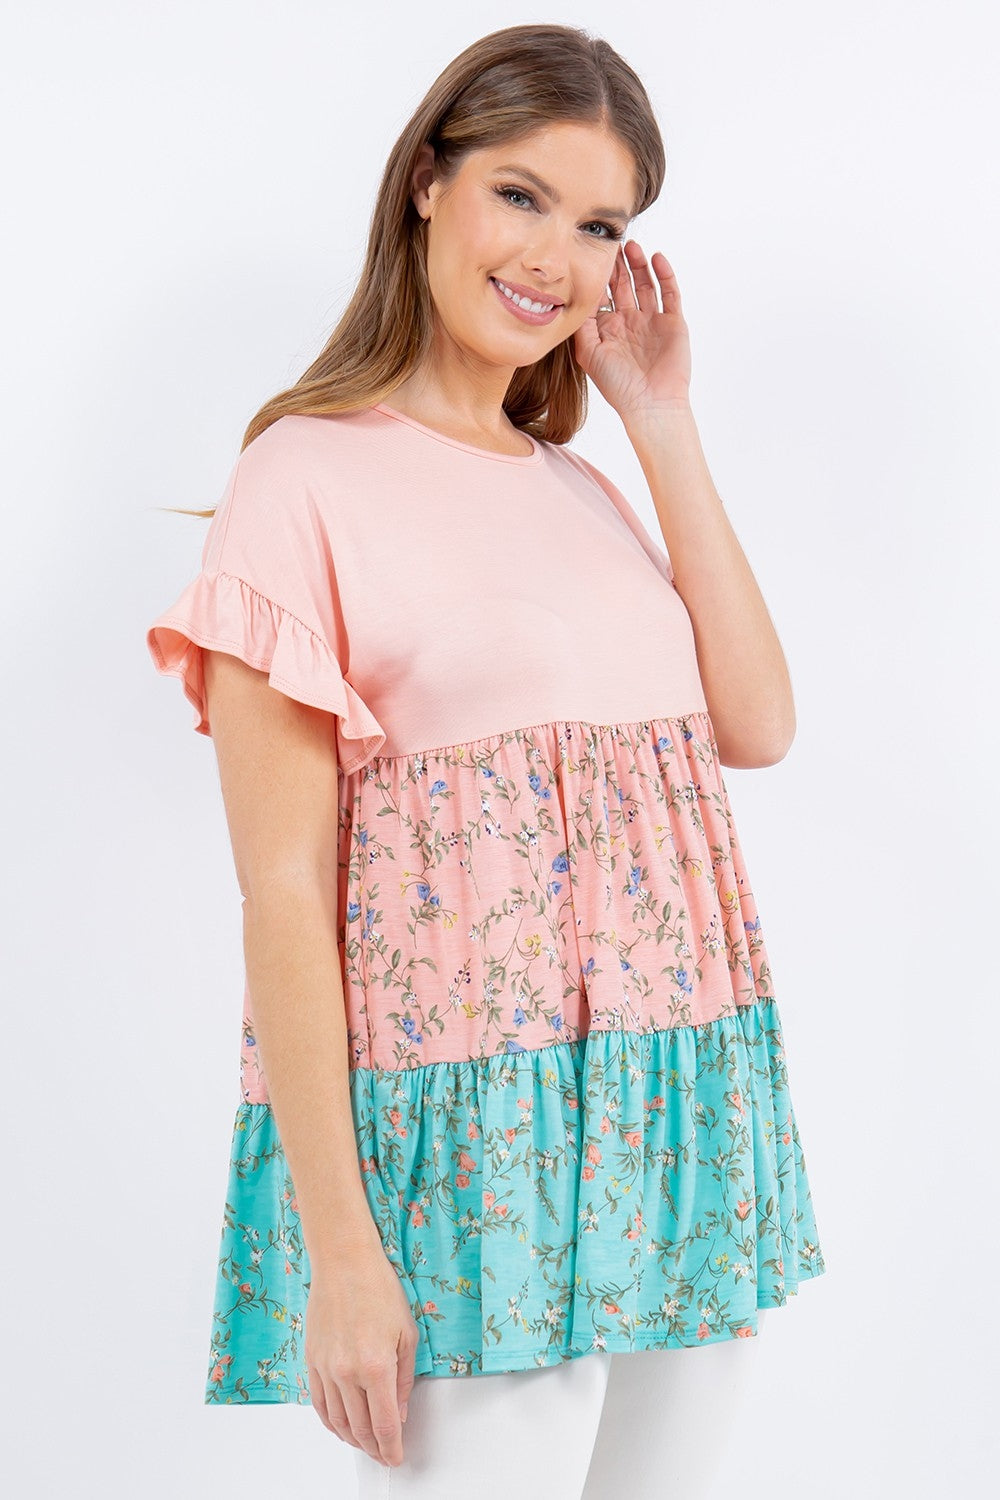 Celeste Full Size Floral Color Block Ruffled Short Sleeve Top - Tigbuls Variety Fashion